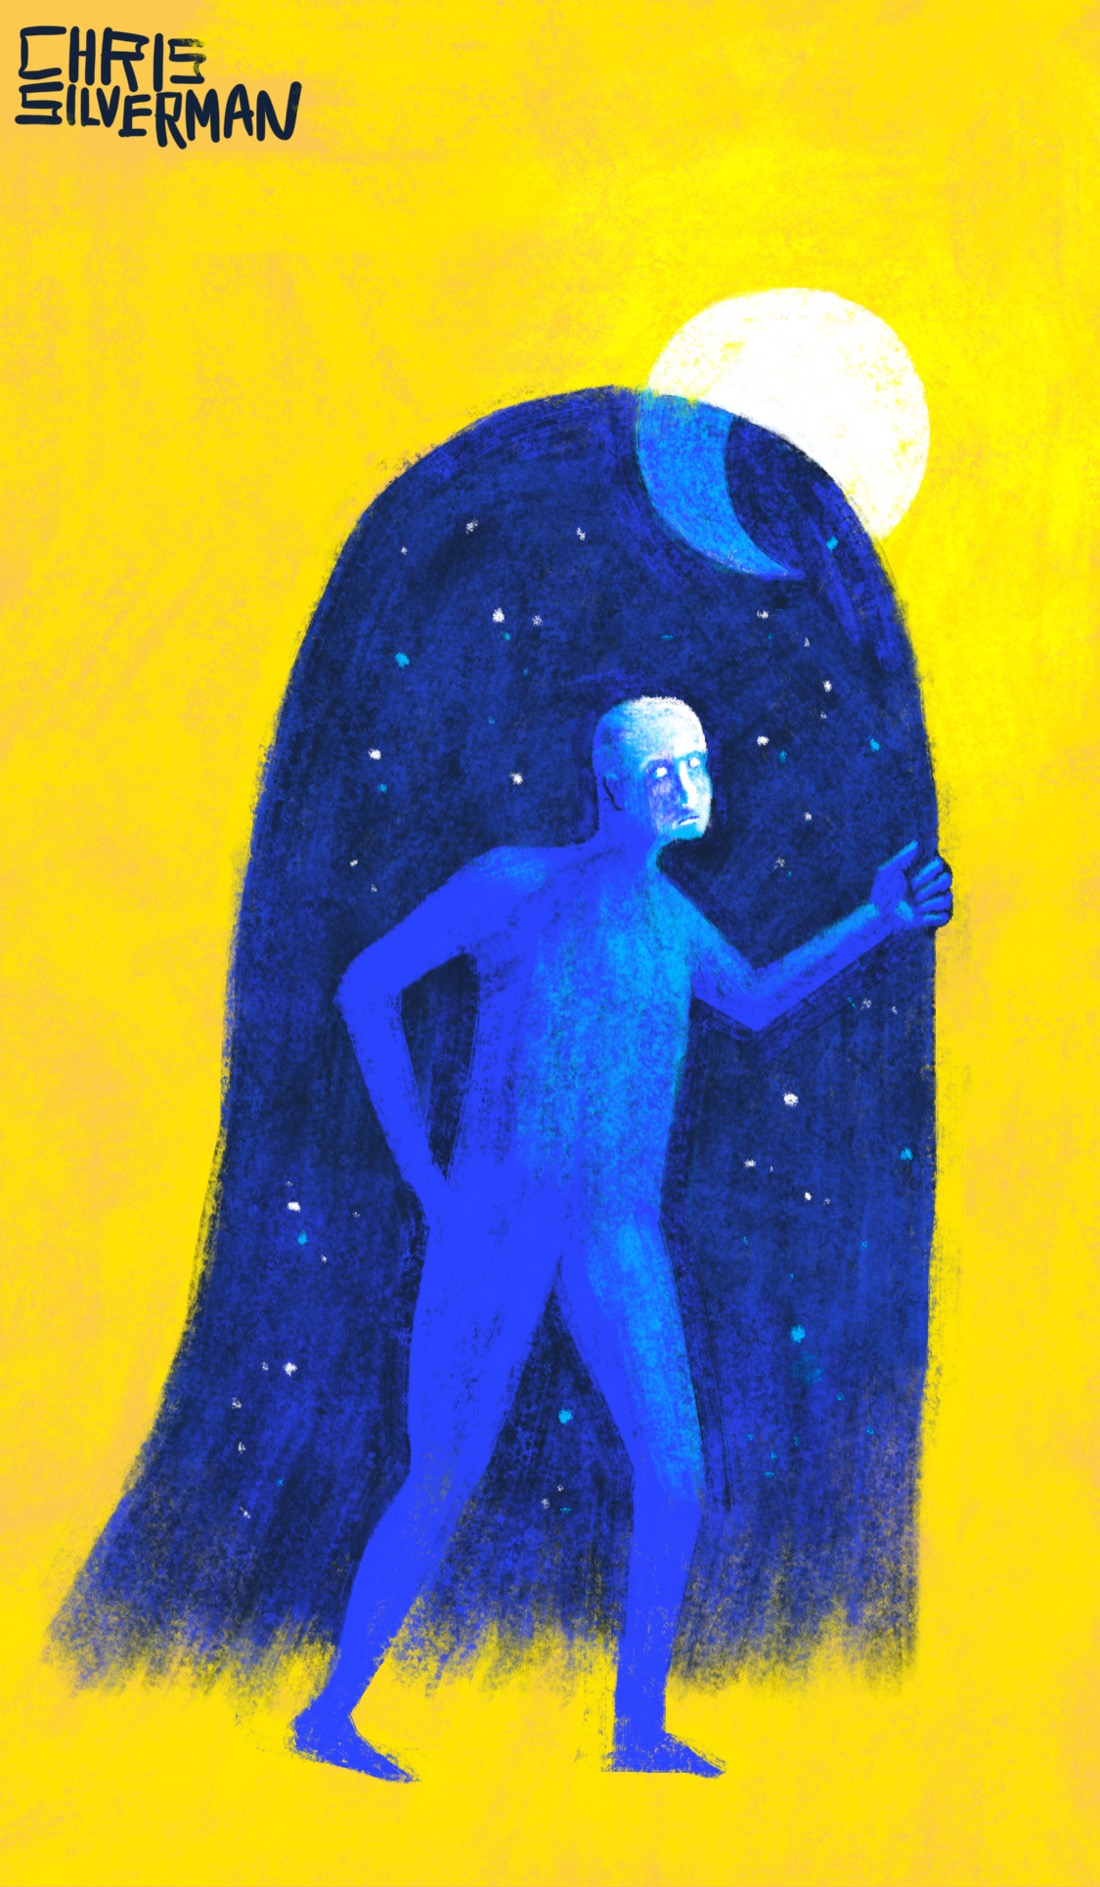 A bright yellow background, and a glowing white sun. In the foreground, a blue figure walks, seemingly covered by a ghost-shaped night sky. The figure is set against the night sky, which is dark blue, has a crescent moon, and is covered with stars. It looks as though the night is a cloak that the figure is wearing during the day. (I realize this person looks like Dr. Manhattan and it is not Dr. Manhattan.)